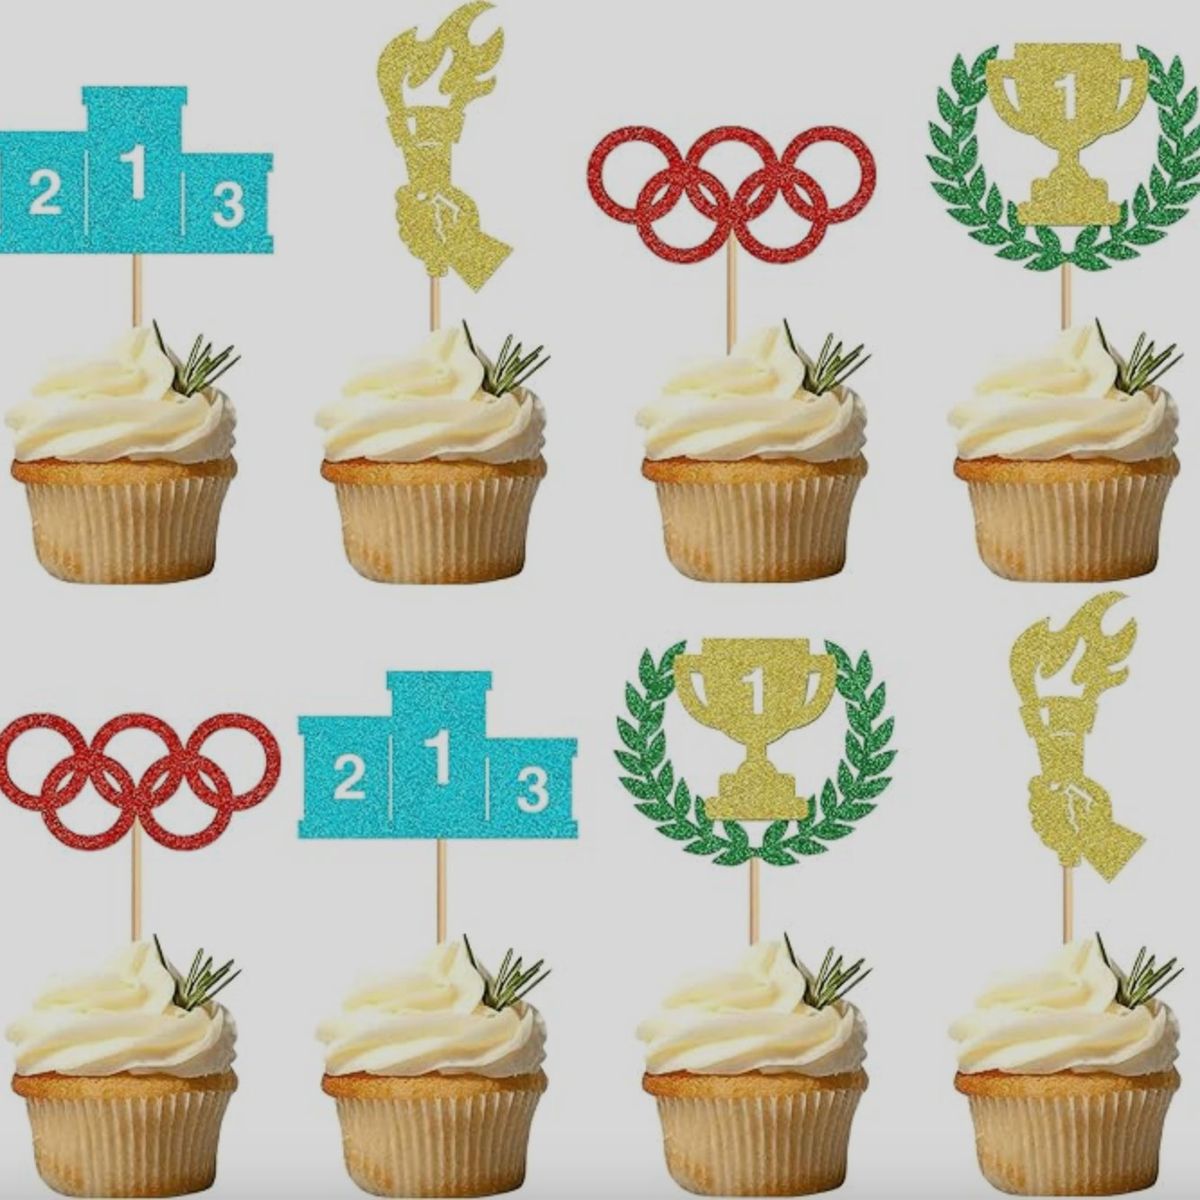 Olympic Games Cupcake Toppers - Set of 24